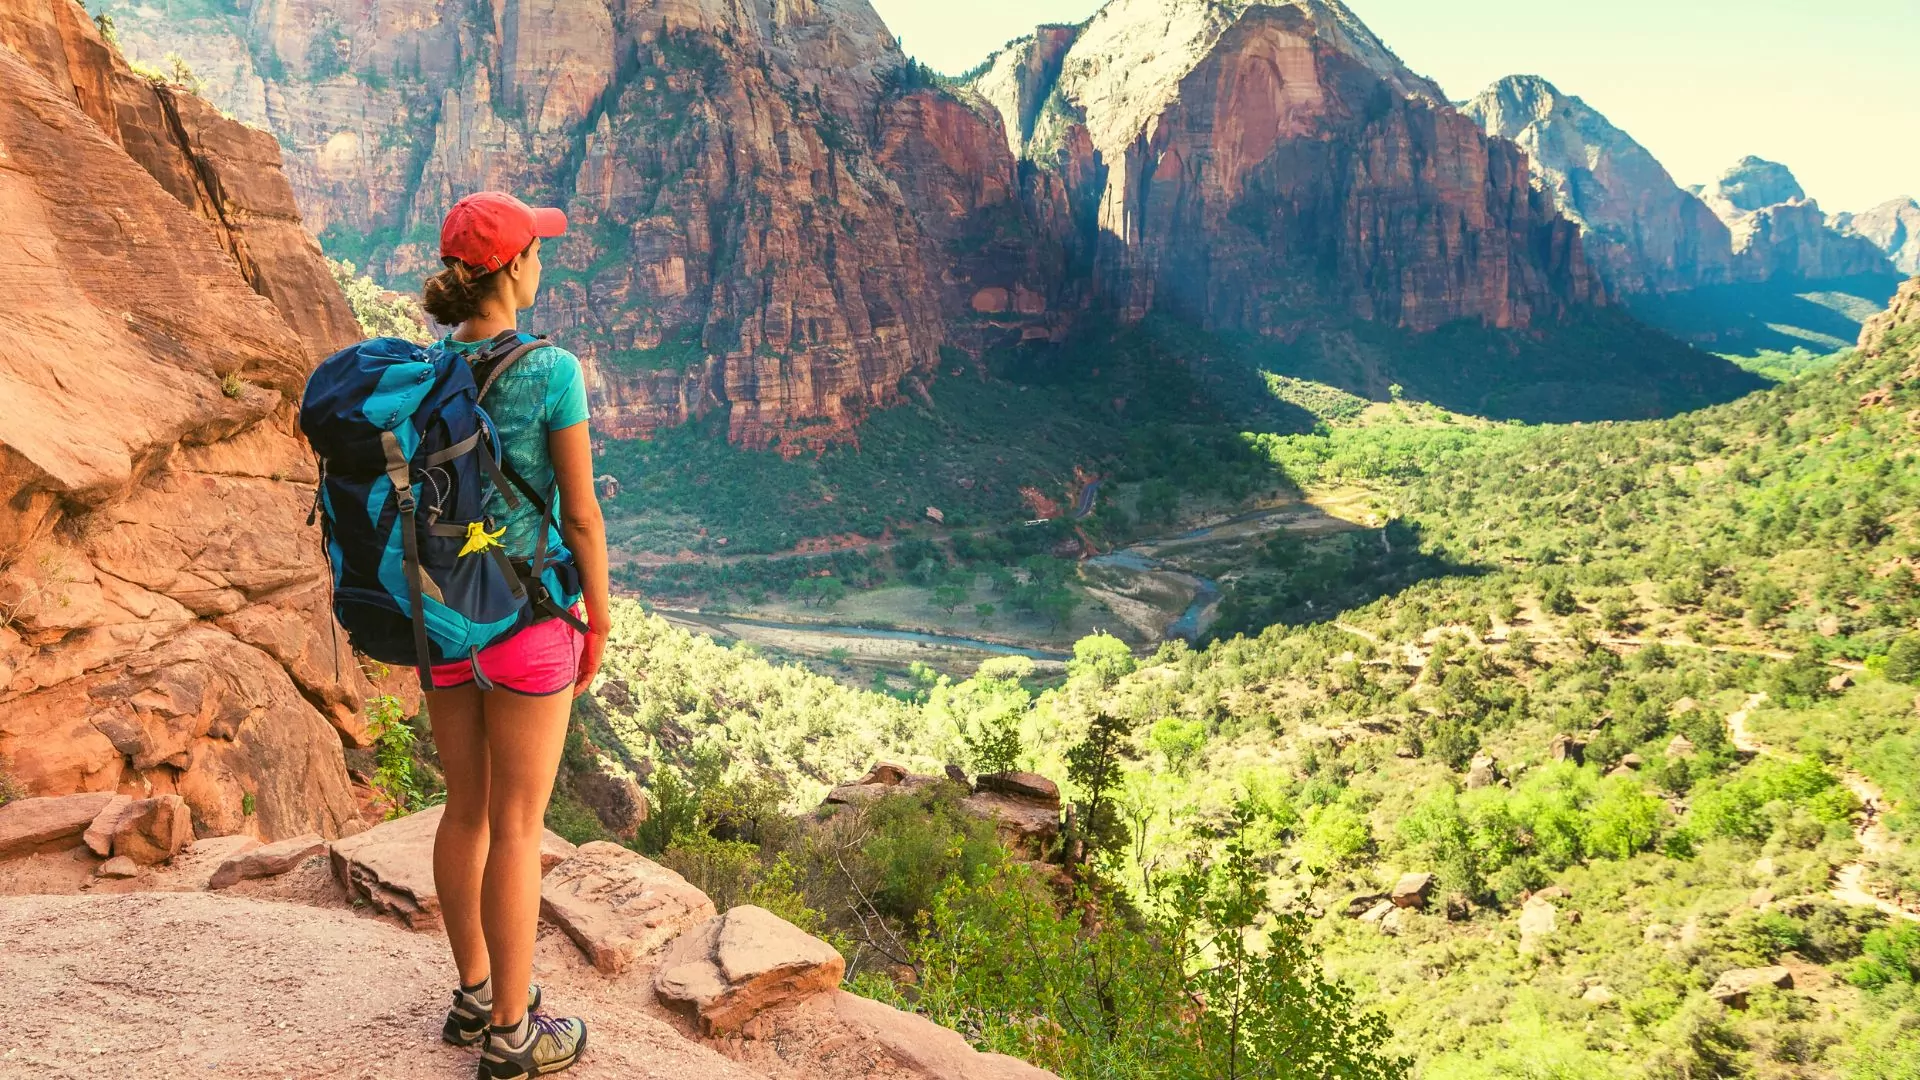 Hiker on West Rim Trail looks out at Zion Canyon